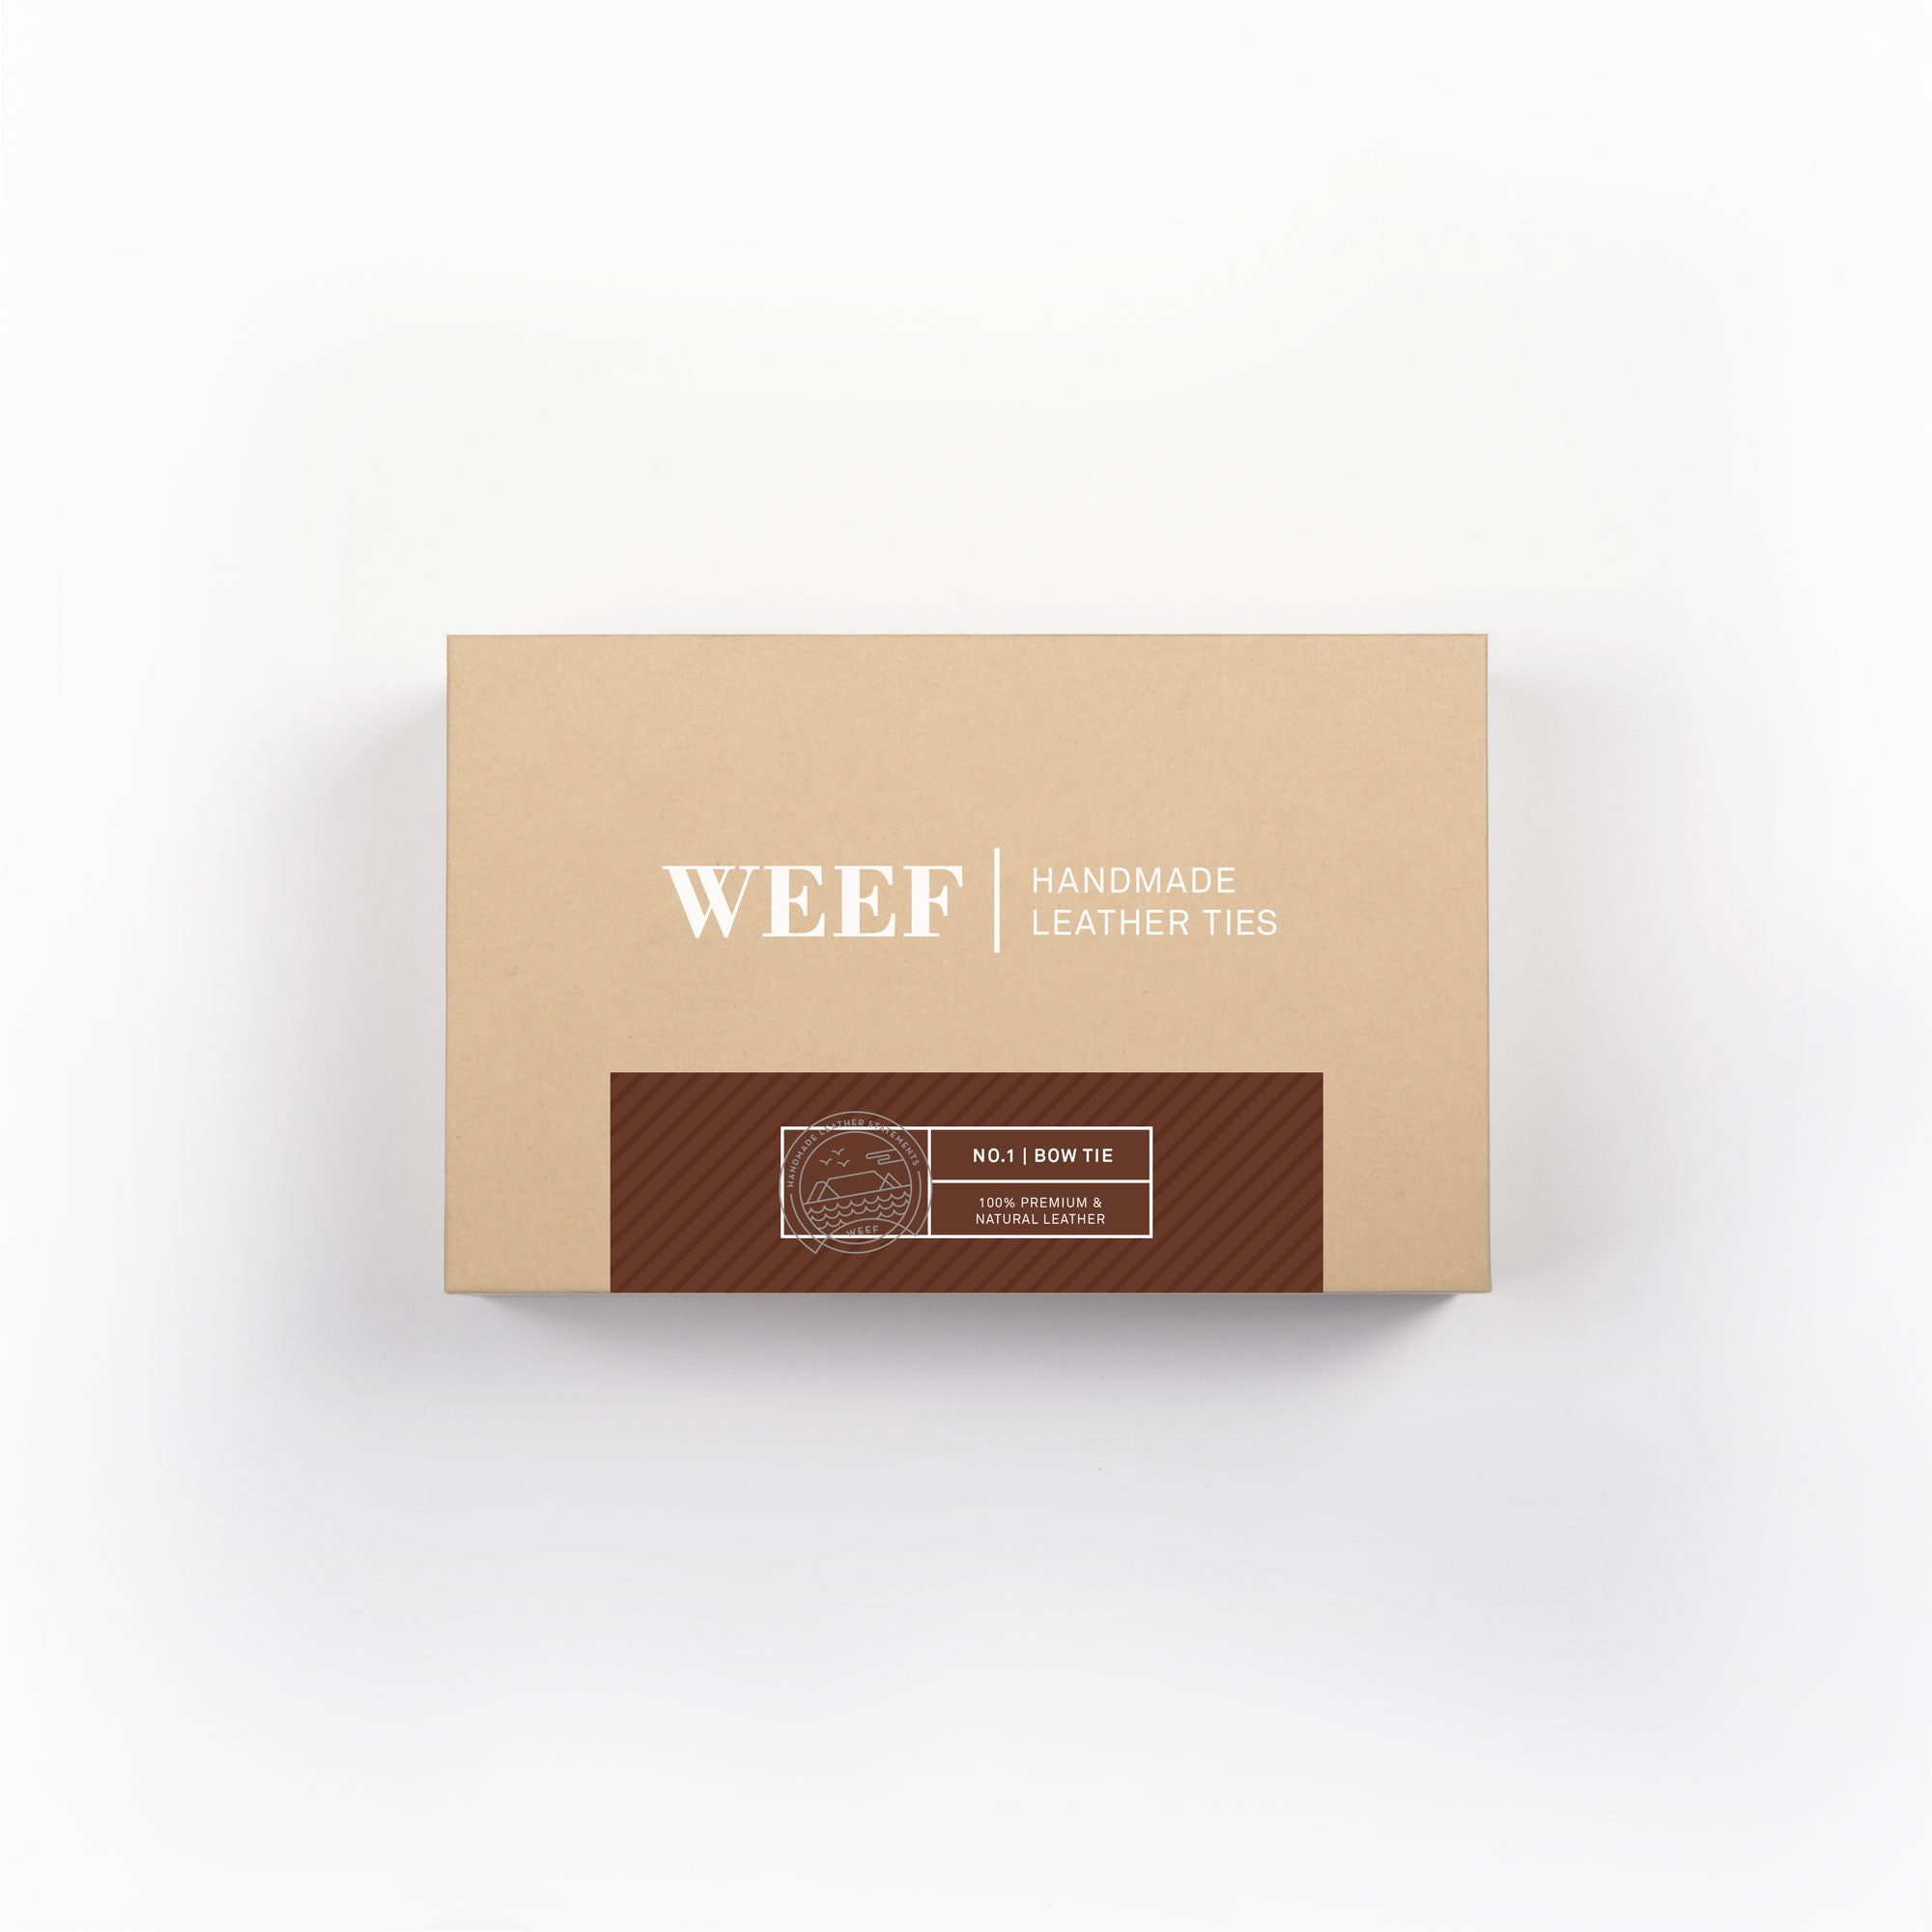 This is the premium packaging box of the charley brown WEEF handmade leather bow tie.